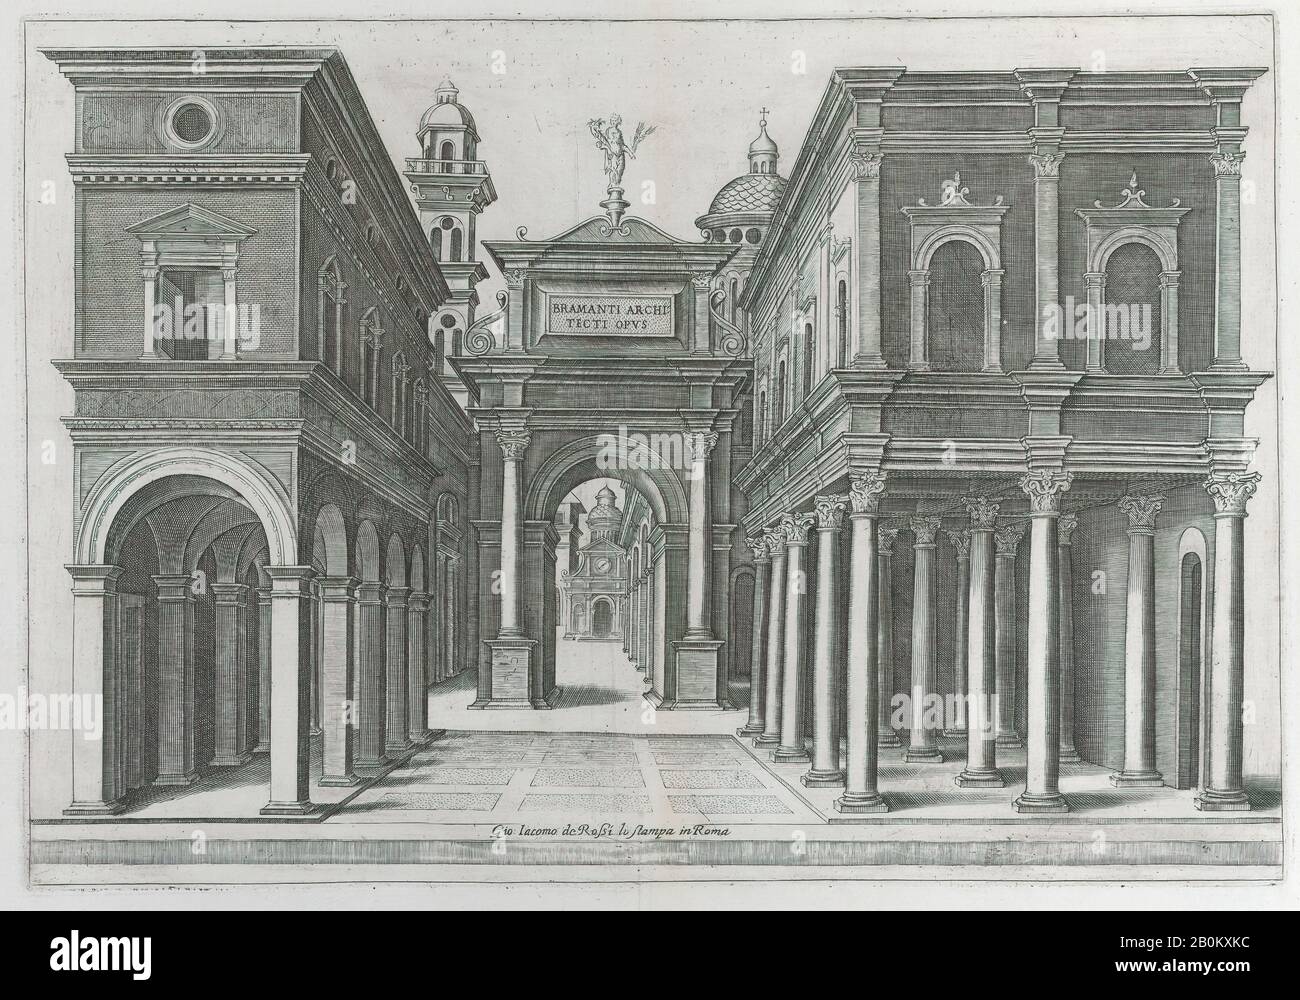 School of Donato d'Agnolo Bramante, A street with buildings, colonnades and an arch, School of Donato d'Agnolo Bramante (Italian, 1444–1515), 1475–1510, Engraving; third state of three, Plate: 10 3/8 × 14 7/8 in. (26.3 × 37.8 cm), Sheet: 14 15/16 × 19 5/8 in. (38 × 49.9 cm Stock Photo